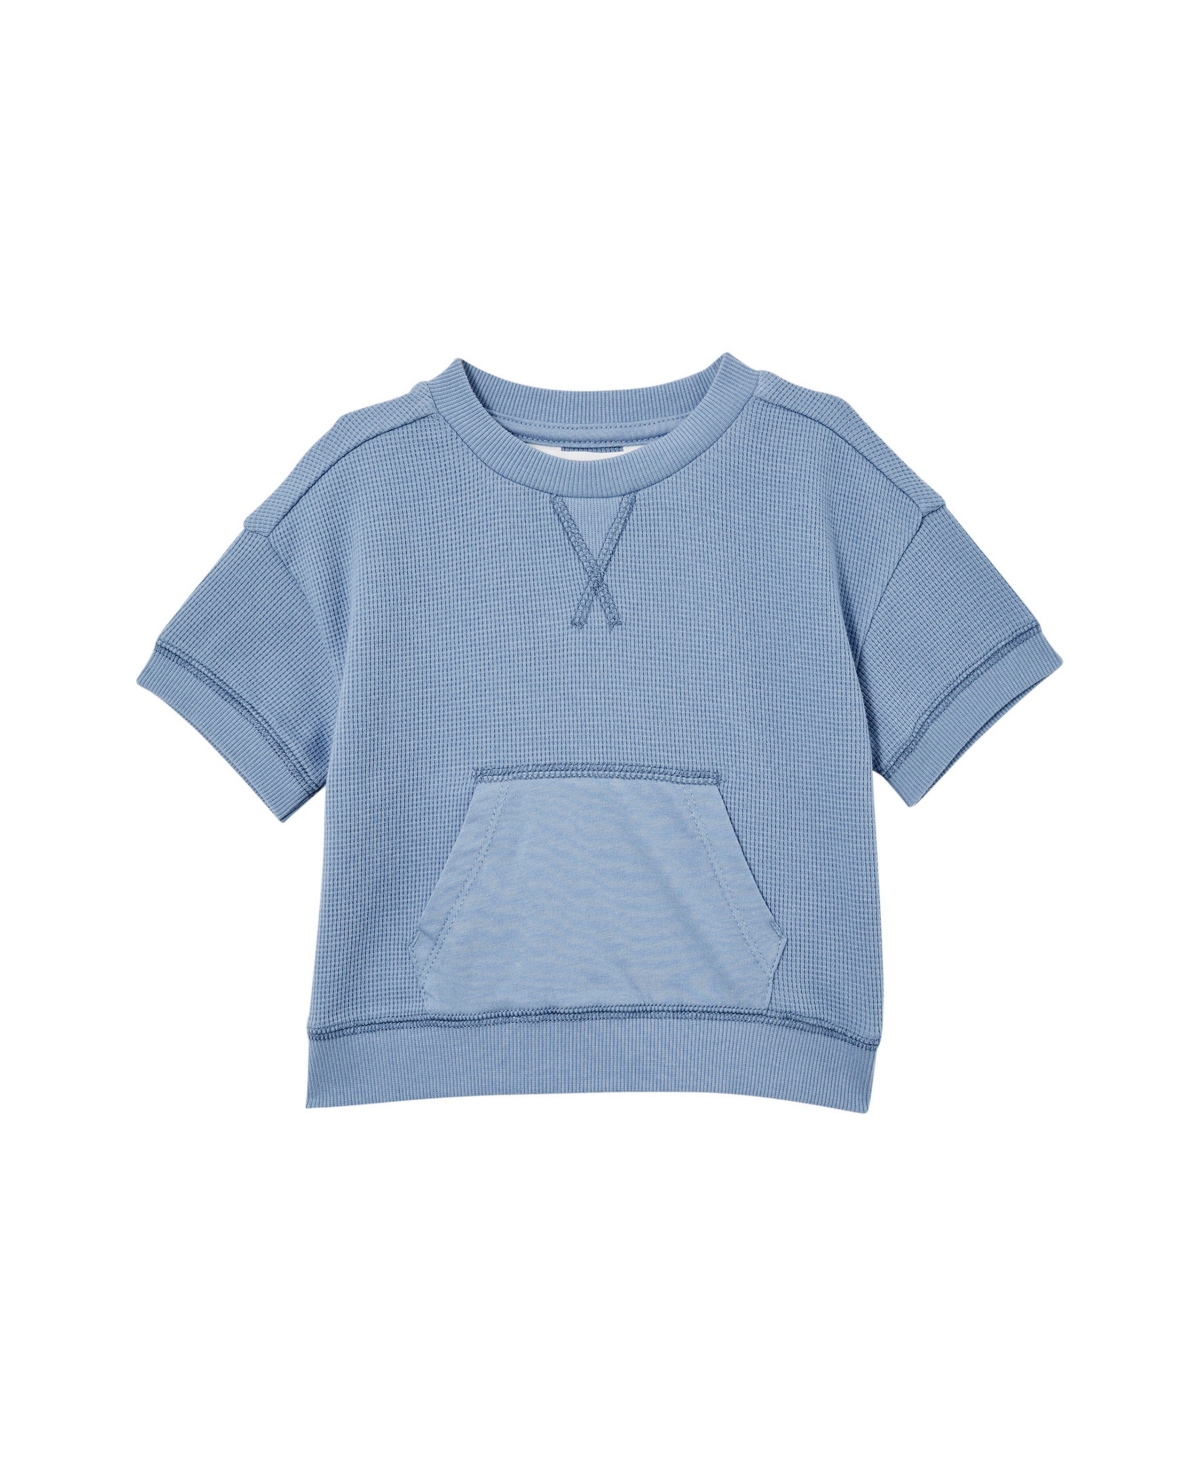 Cotton On Baby Boys Waffle Knit Short Sleeved Top In Dusty Blue